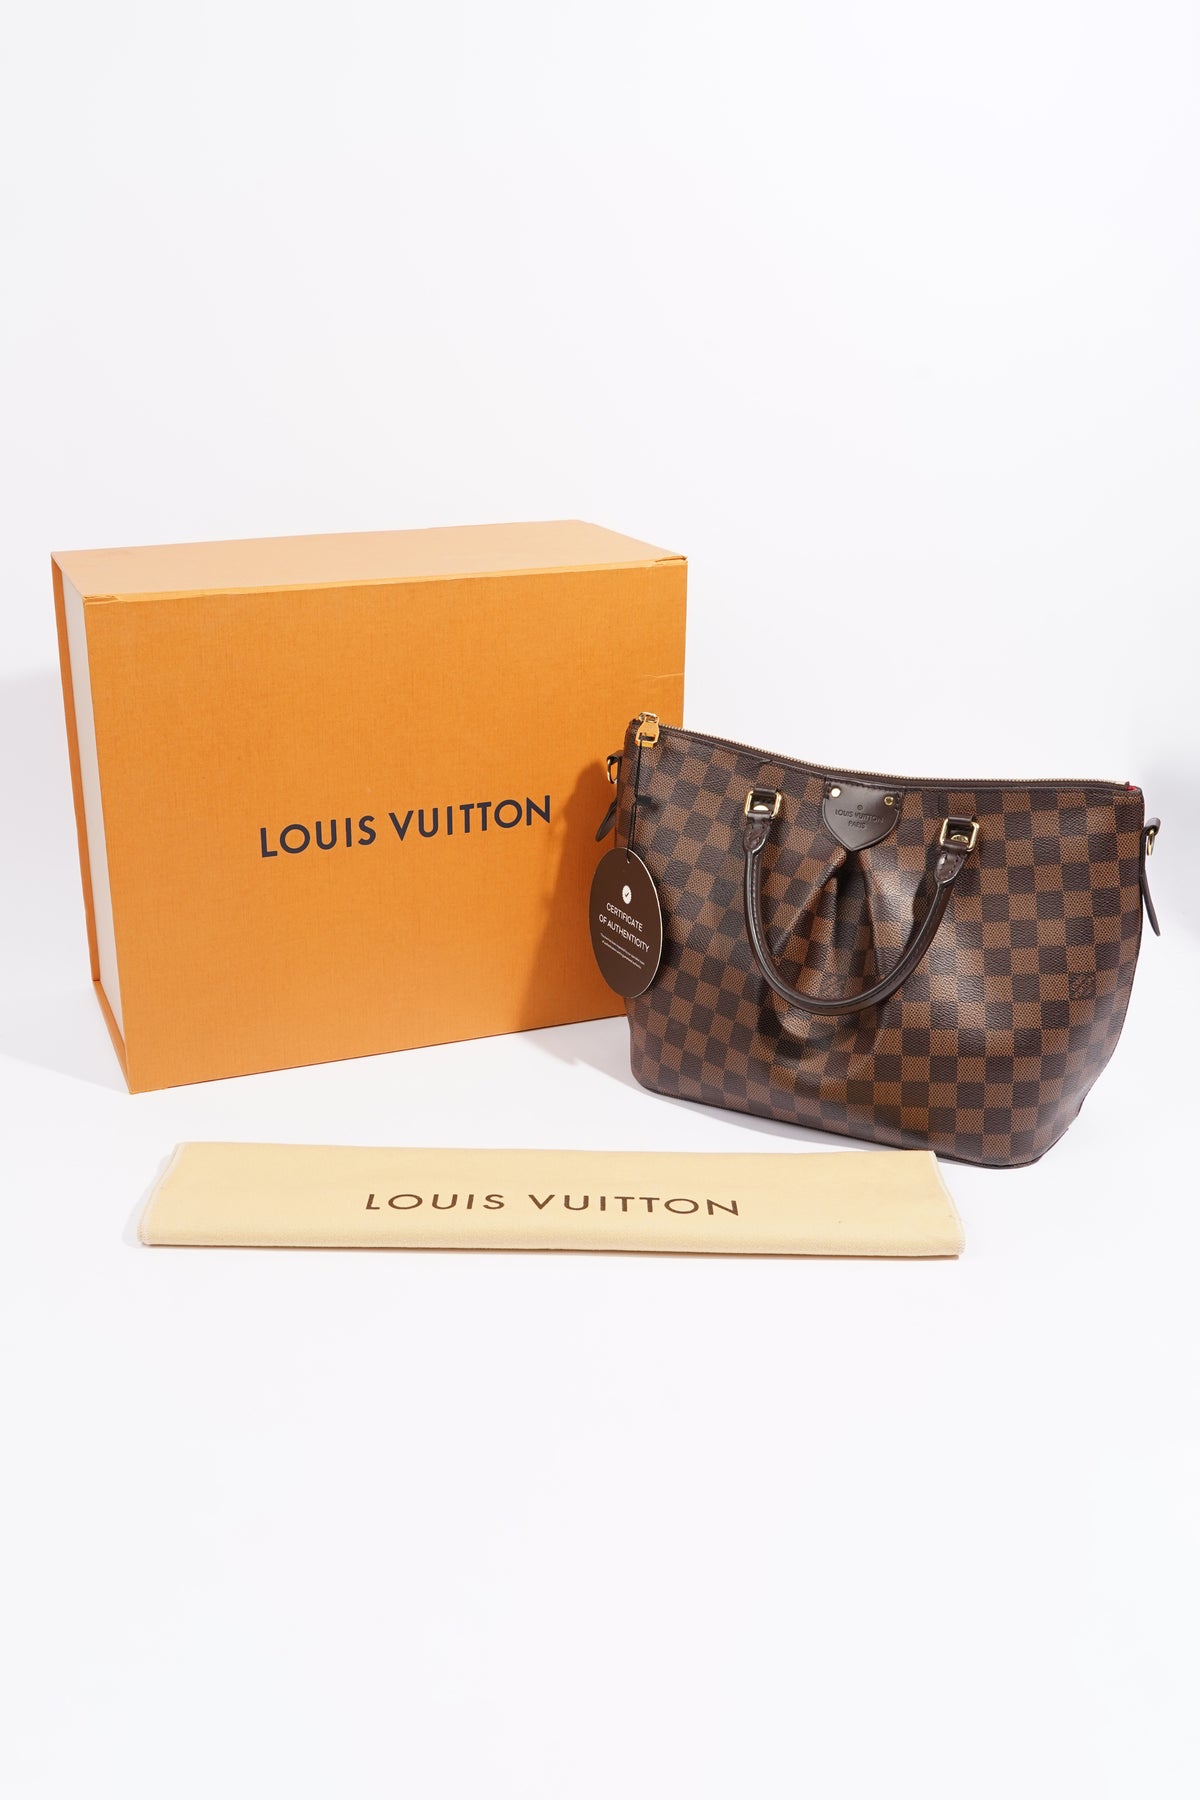 Louis Vuitton Siena Damier Ebene MM Brown in Canvas/Leather with